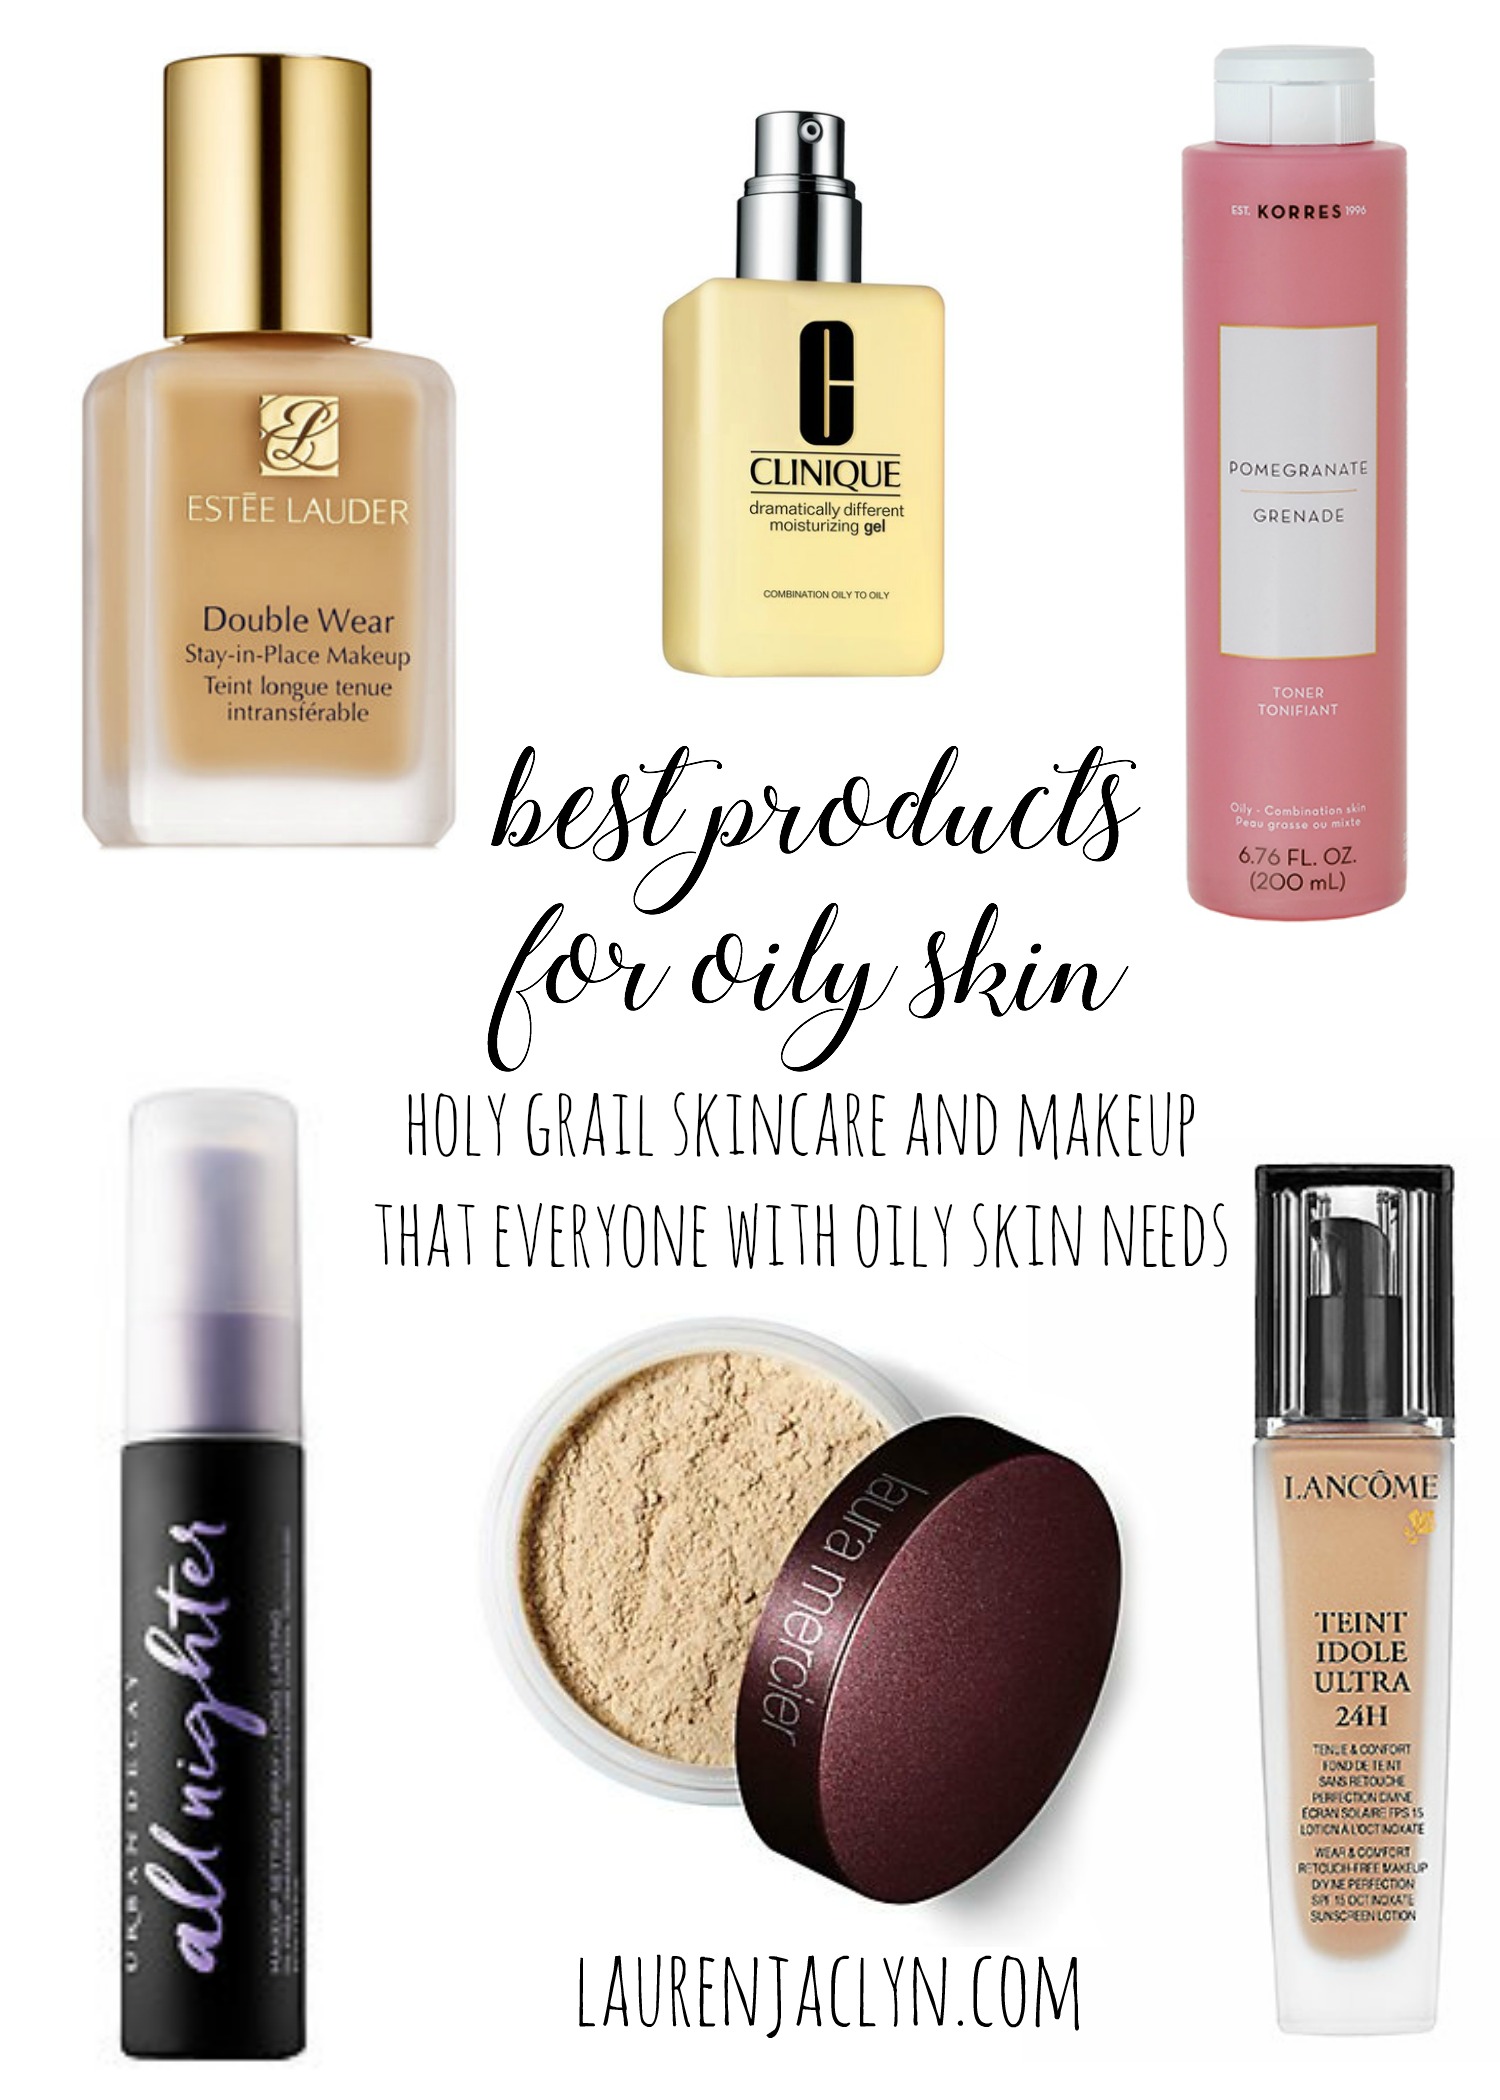 Best Products for Oily Skin - Lauren Jaclyn